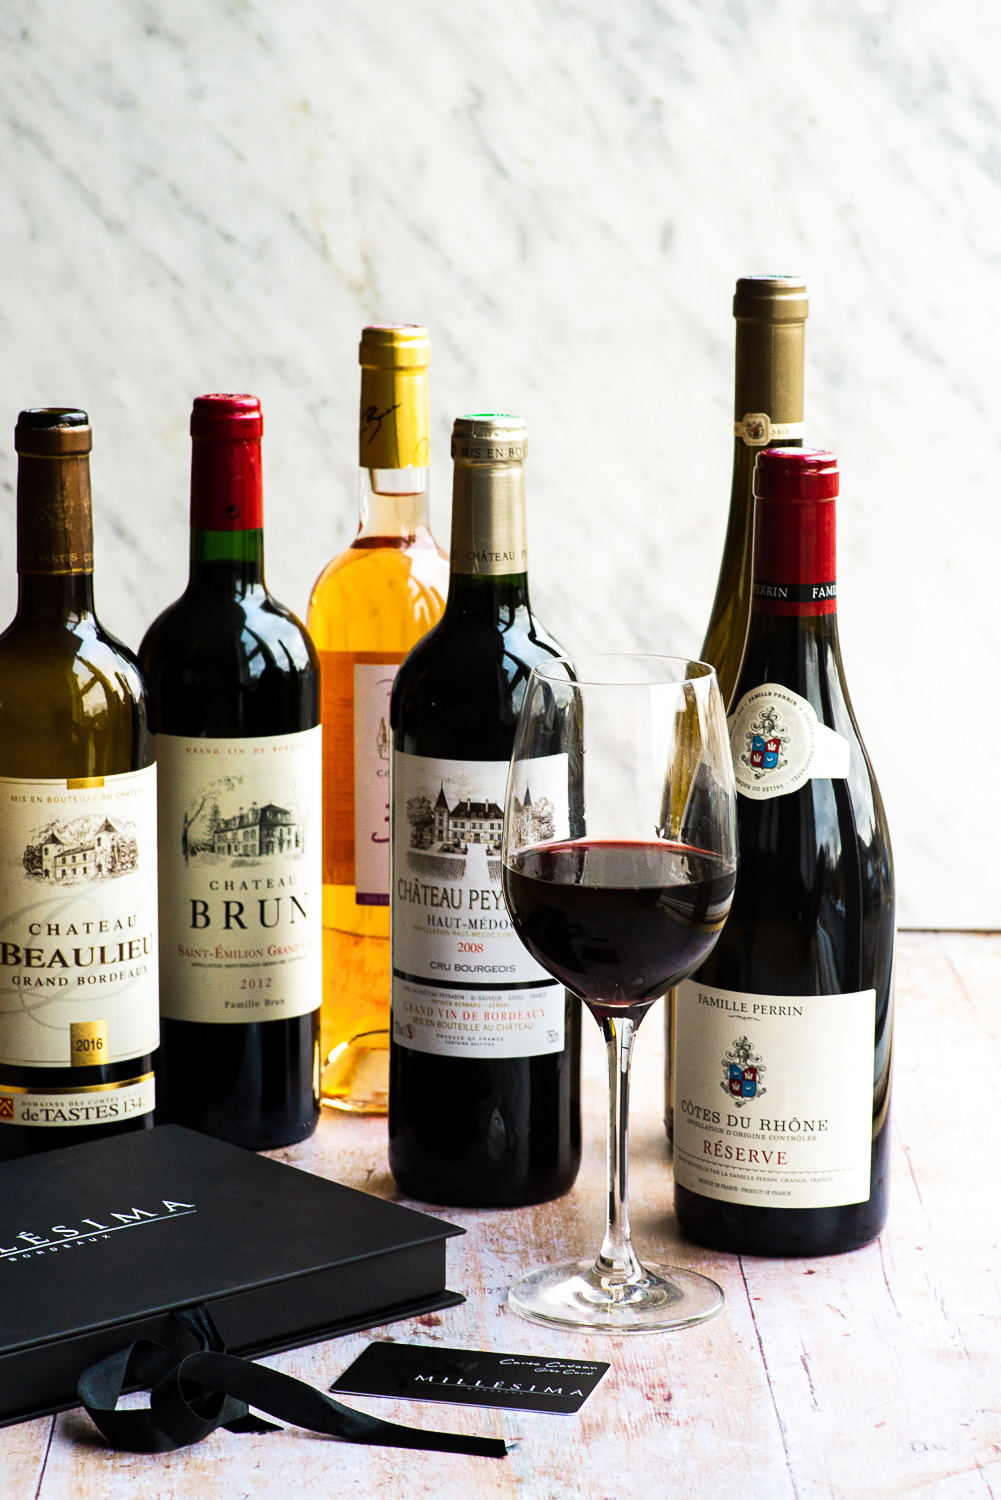 Tasting Case of 6 Wines | Millesima, a Bordeaux-based wine merchant with one of the most comprehensive selections of fines wines from everywhere in the world.